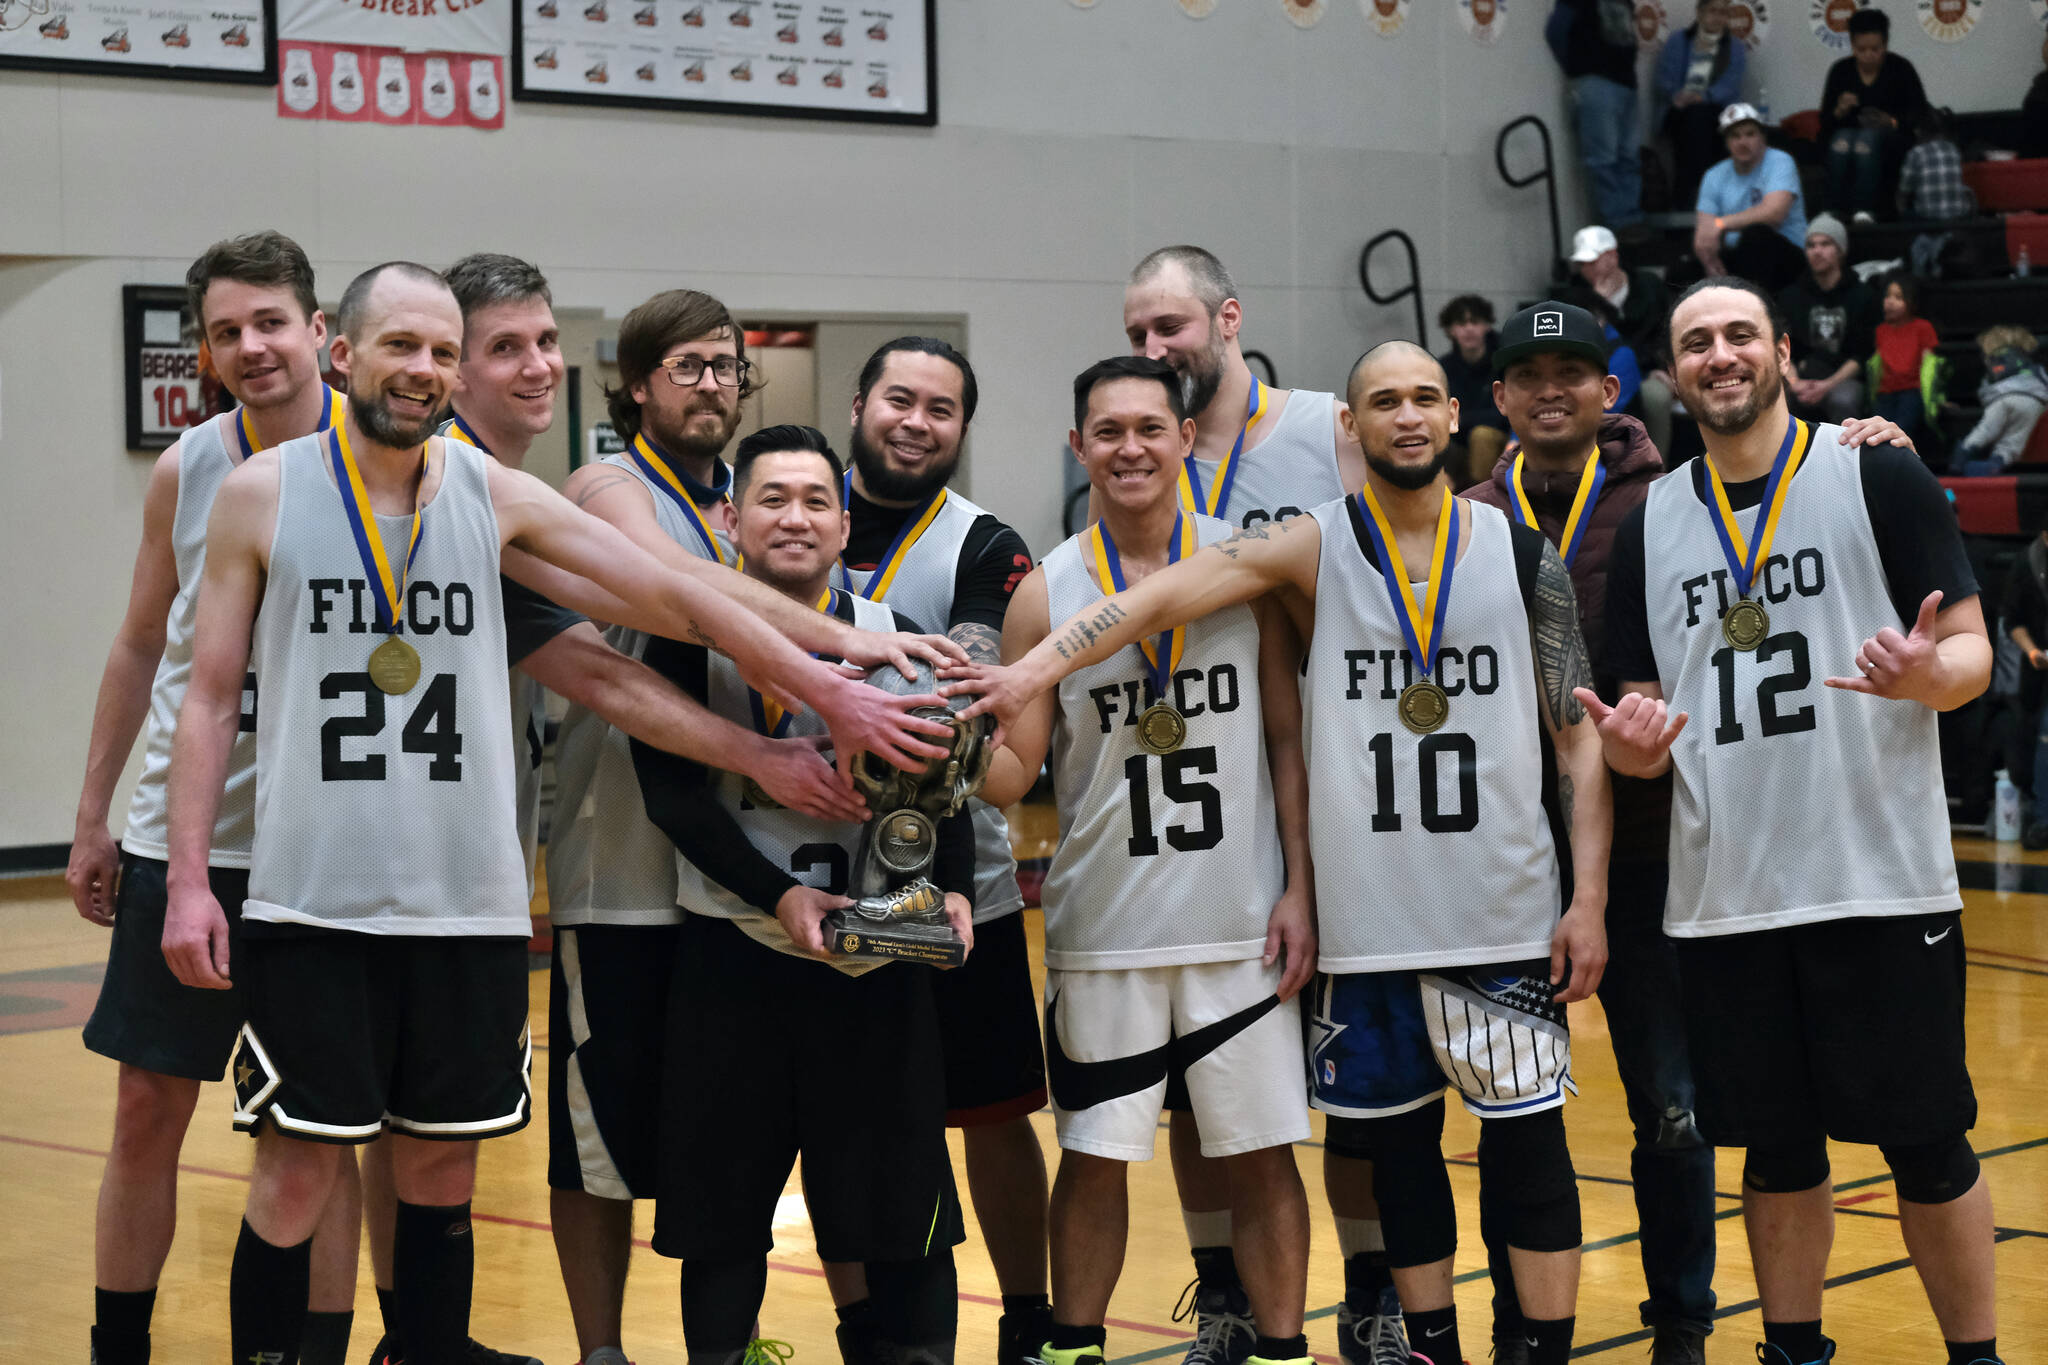 C Bracket champions Filcom pose with their trophy. (left to right) Charlie Herrington, Alex Heumann, Tom Gizler, Adam Brown, Mike Lim, Andrew Malacas, Nino Bohulano, Ray Zimmer, Larry Cooper, Ronin Tagsip and Jason Haskell at the Gold Medal Basketball Tournament, Saturday, March 25, at Juneau-Douglas High School: Yadaa.at Kalé. (Klas Stolpe/For the Juneau Empire)